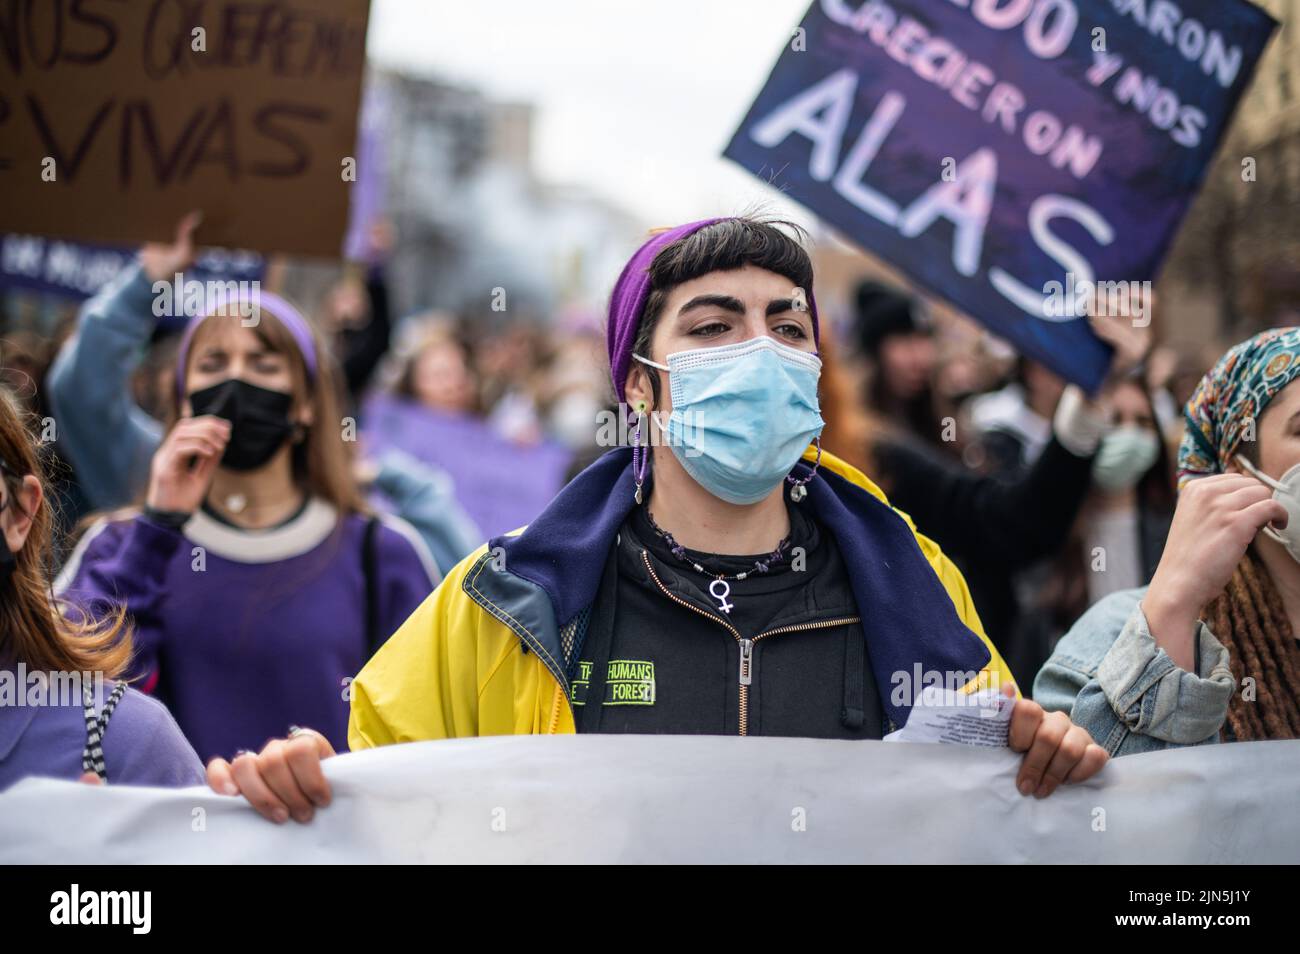 Hundreds of women gather in the streets of Zaragoza to celebrate to celebrate March 8, International Women's Day, Spain Stock Photo